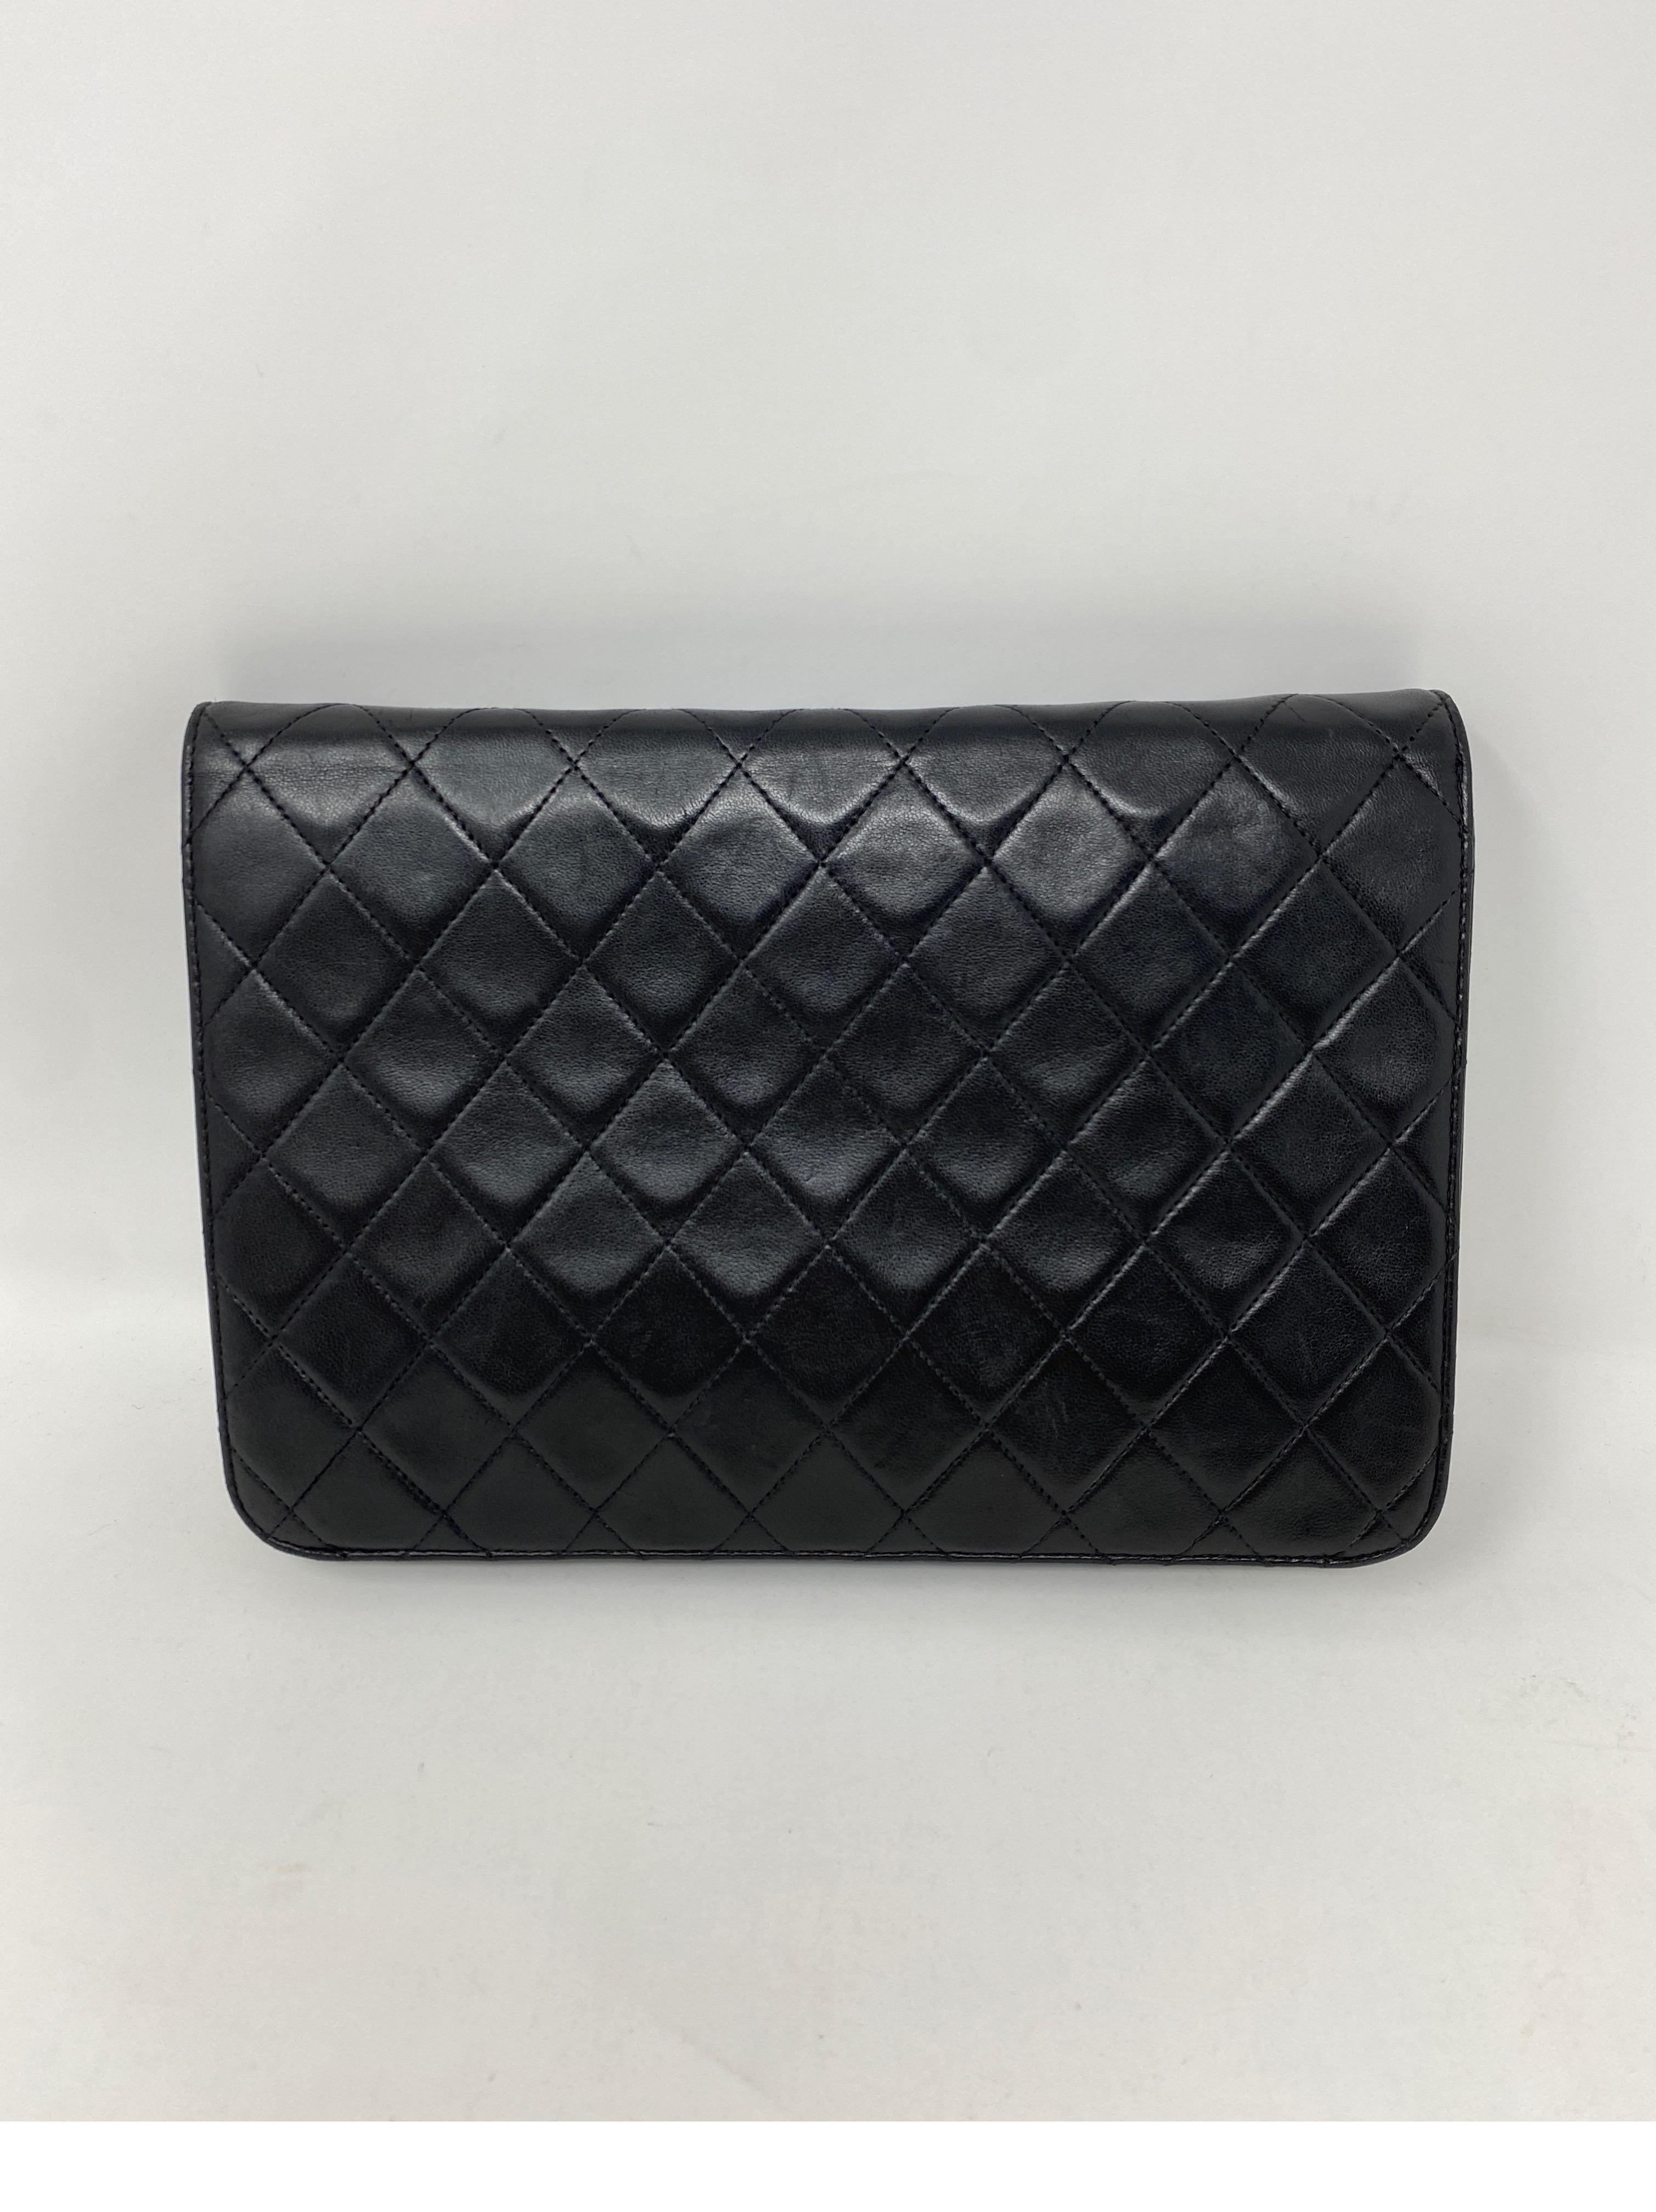 Chanel Black Leather Bag with Gold Chain Strap. Vintage bag in good condition. Lambskin leather. 24 kt gold plating on hardware and chain. Can be worn as a clutch or as a shoulder bag. Includes authenticity card. Guaranteed authentic. 